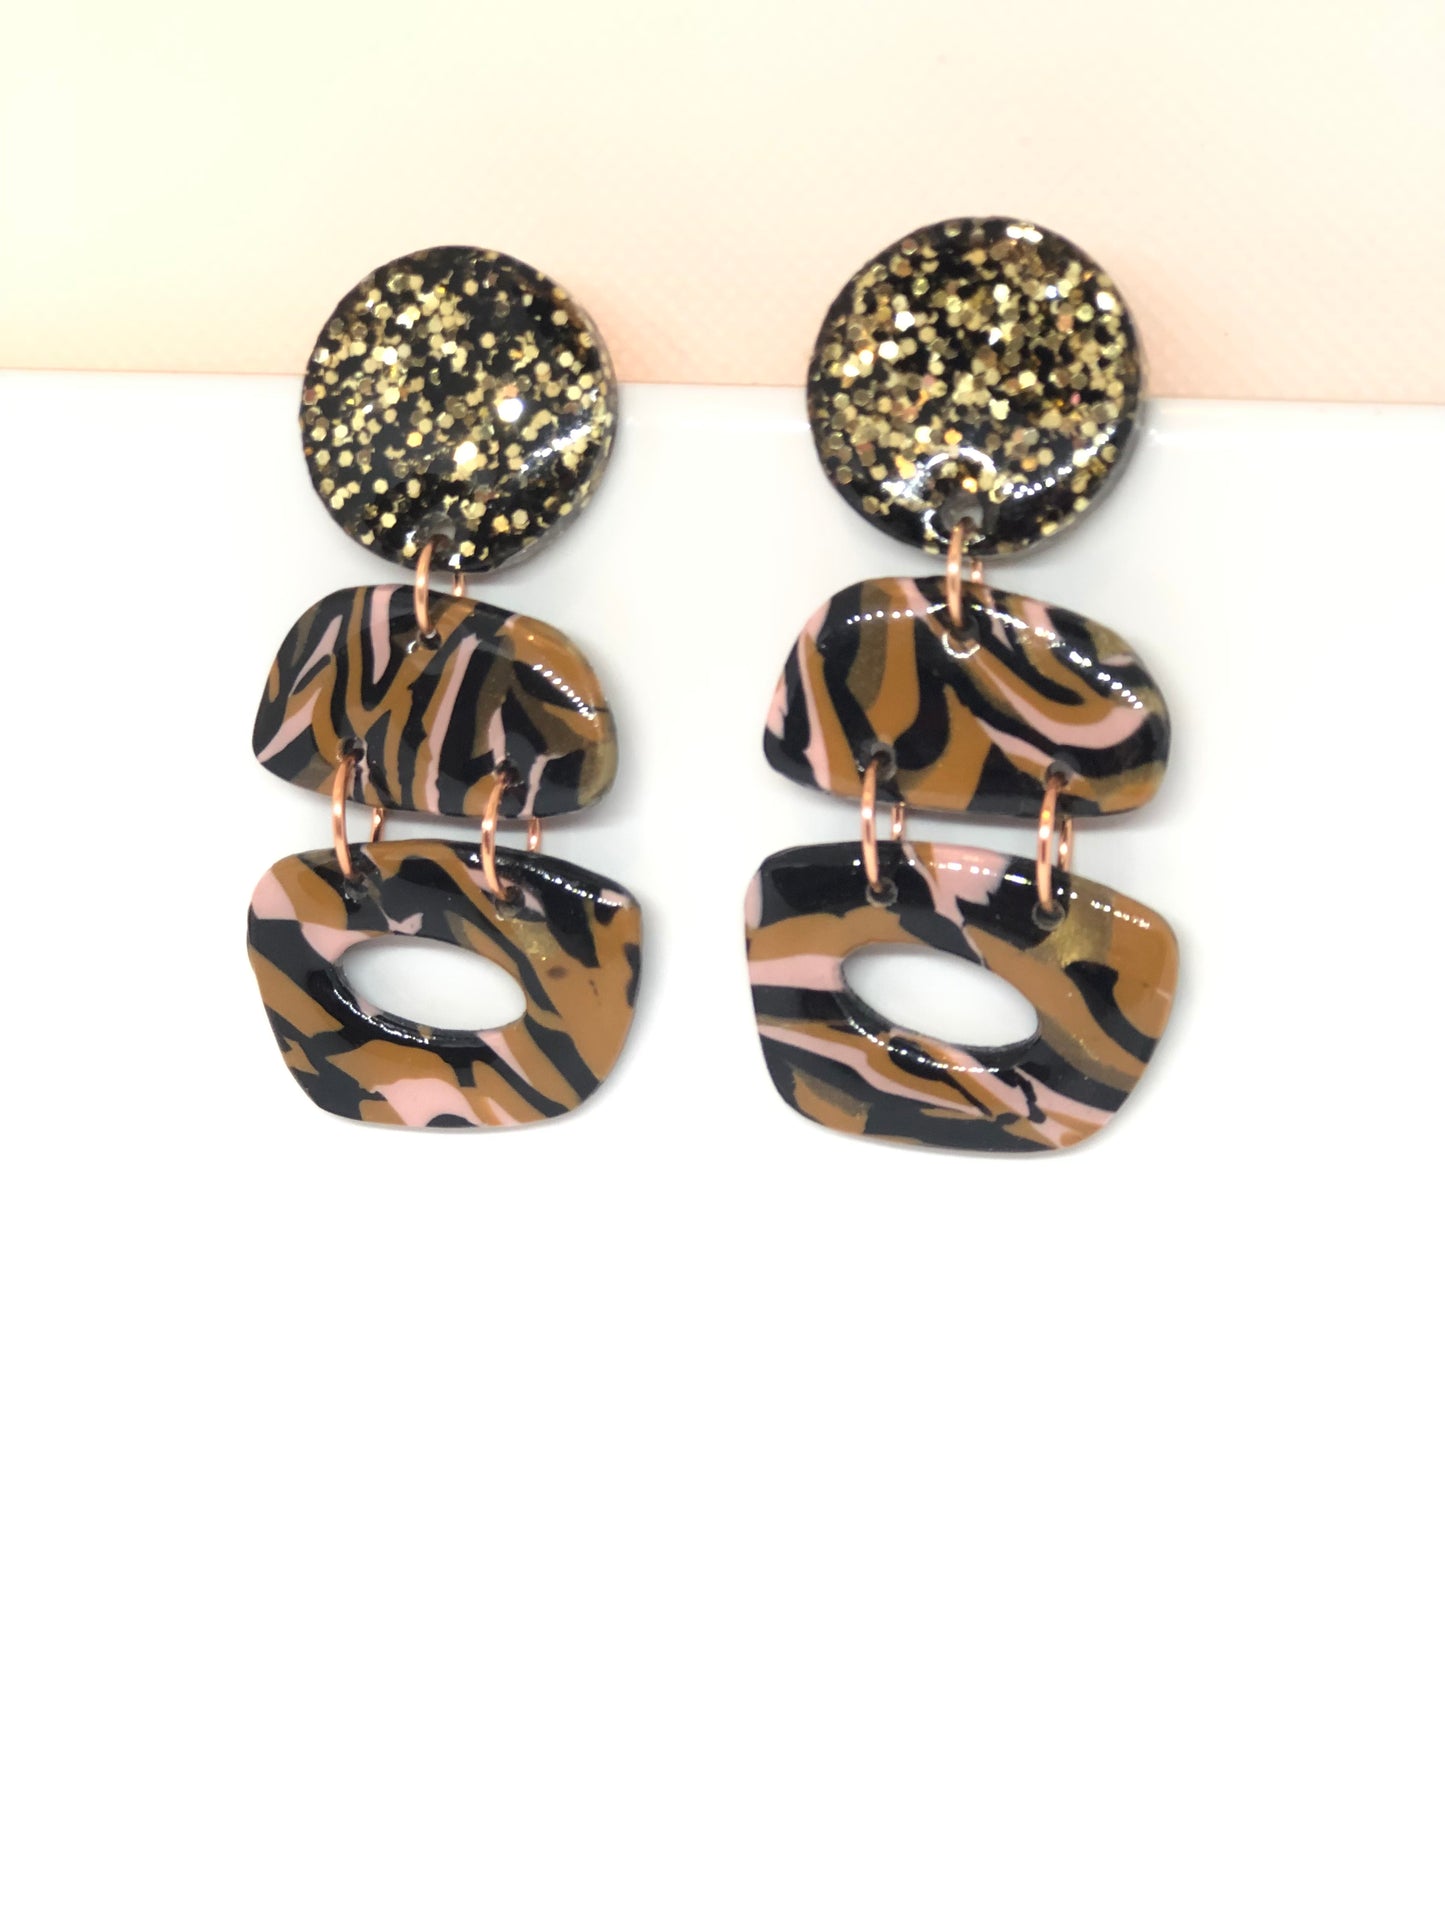 Queen Chic Afri Salmon and Black Stud Earrings